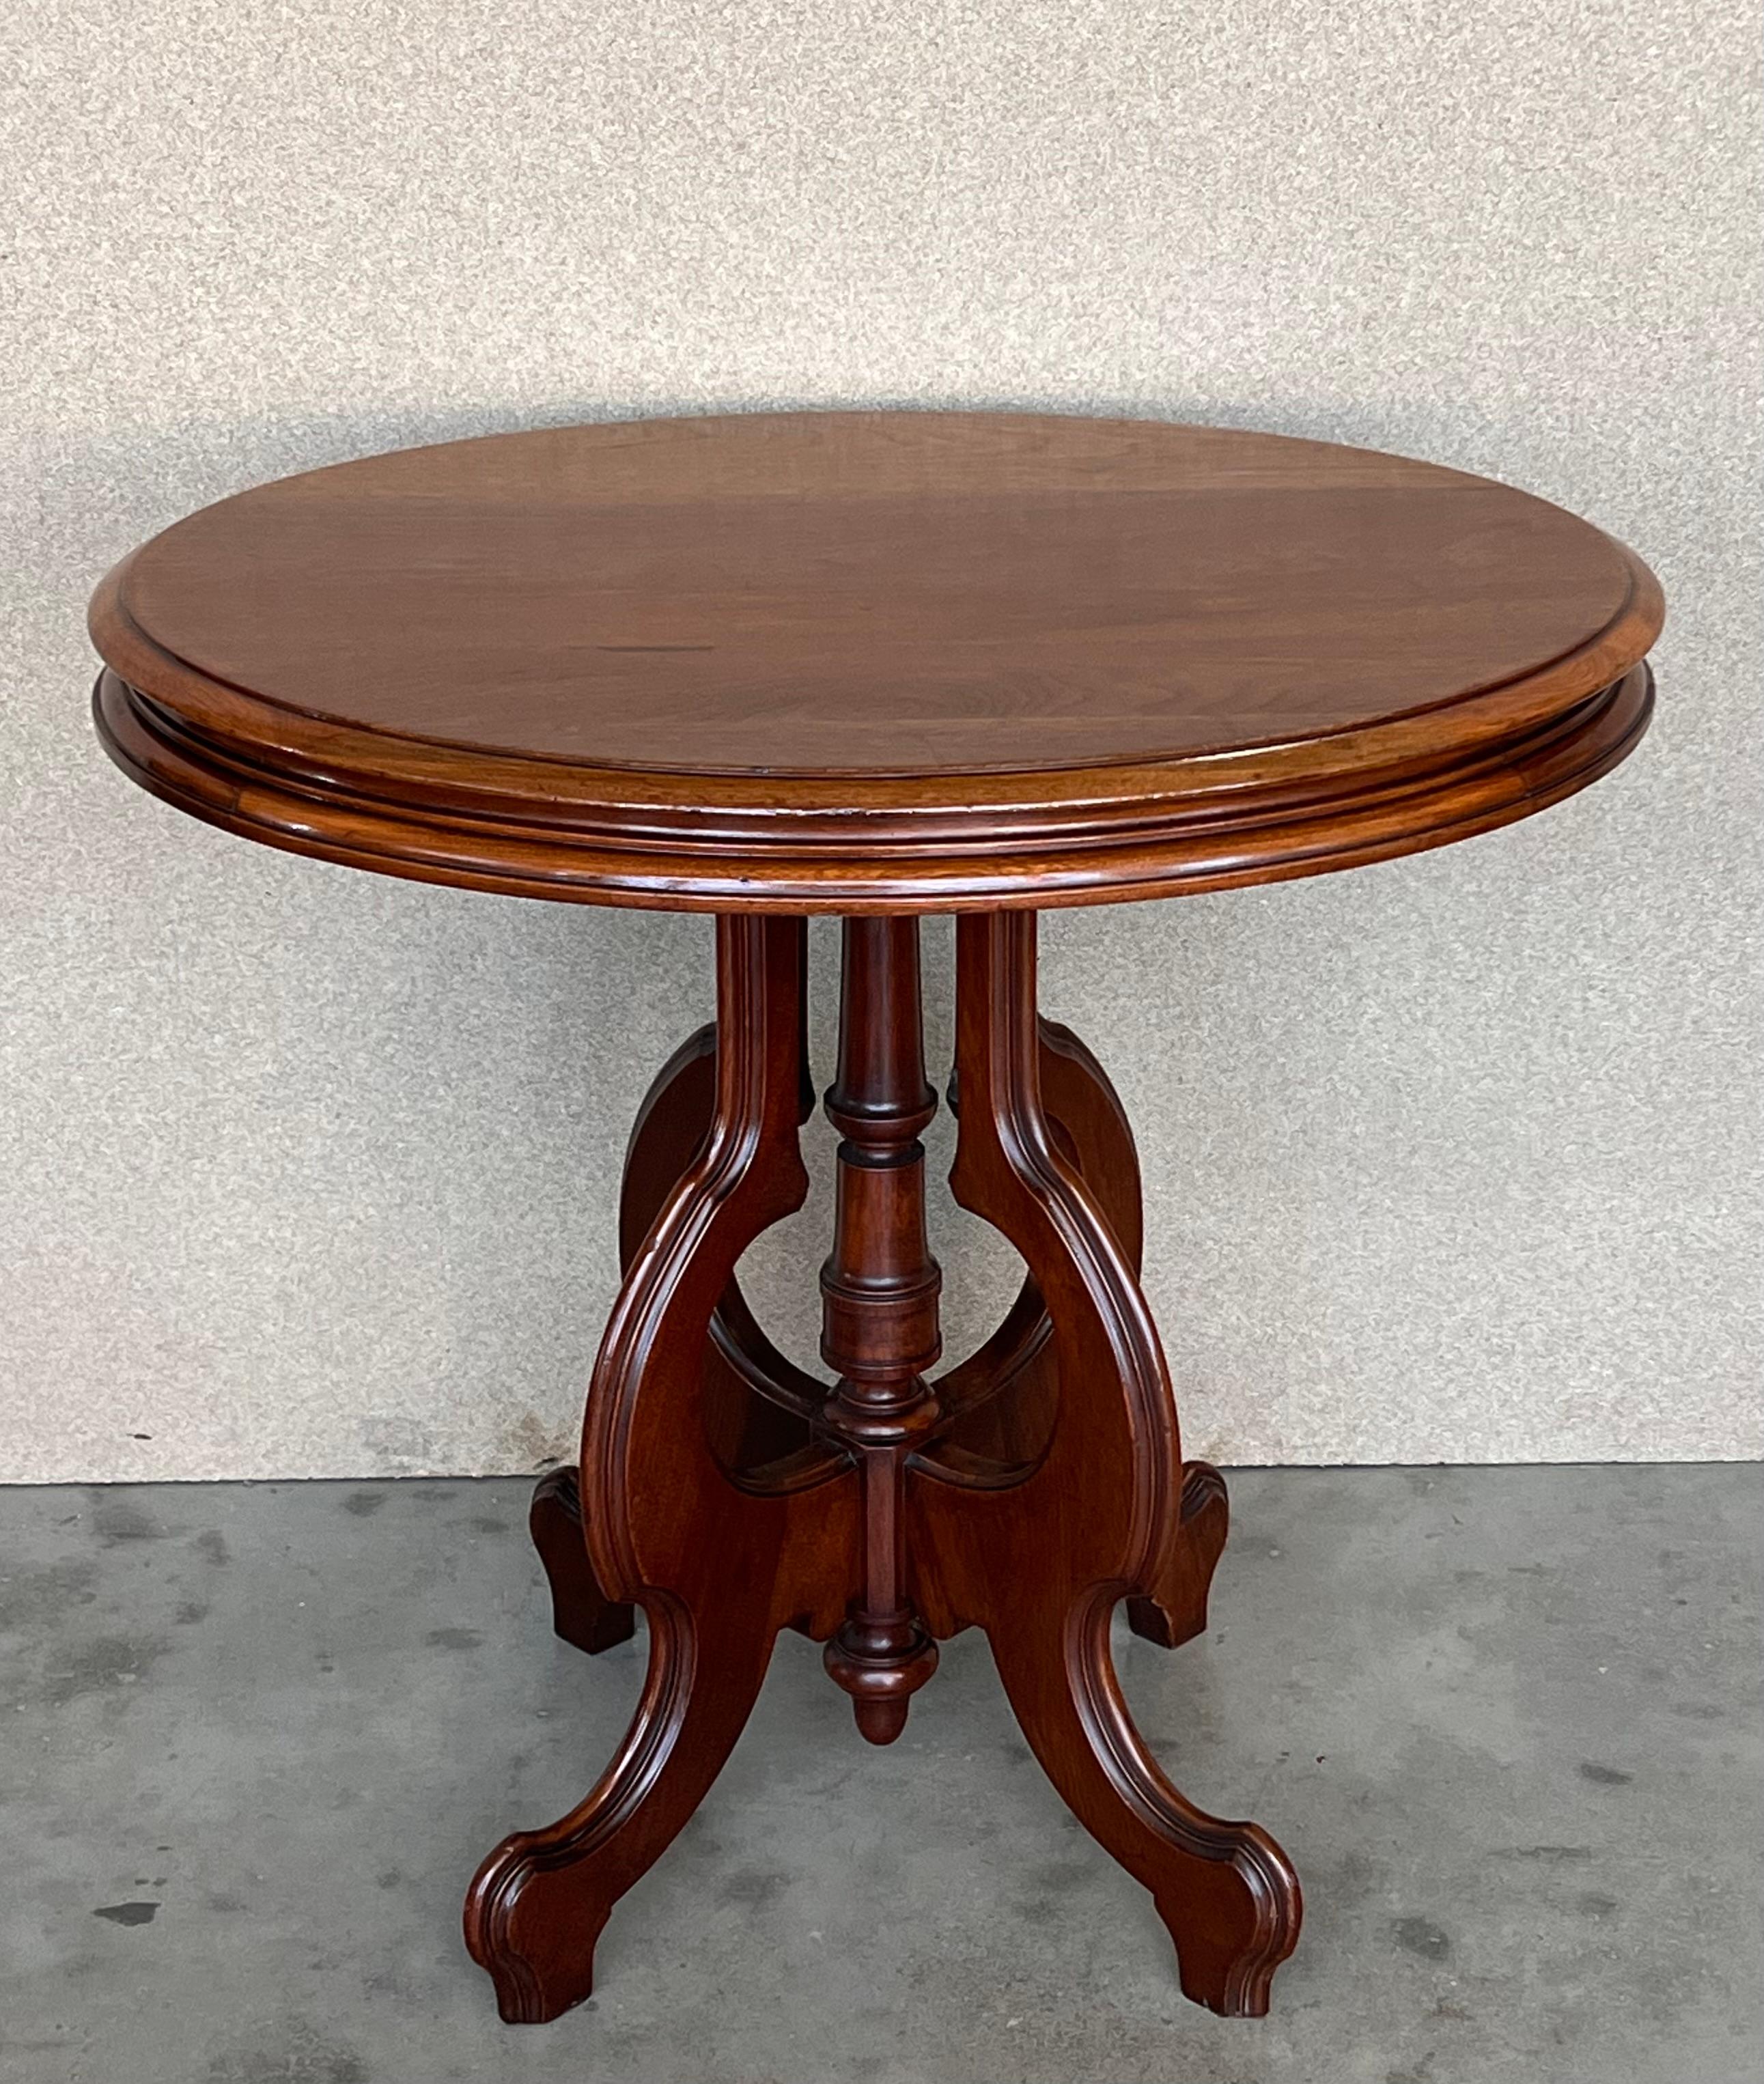 European Victorian Burr Walnut Inlaid Oval Coffee Table For Sale